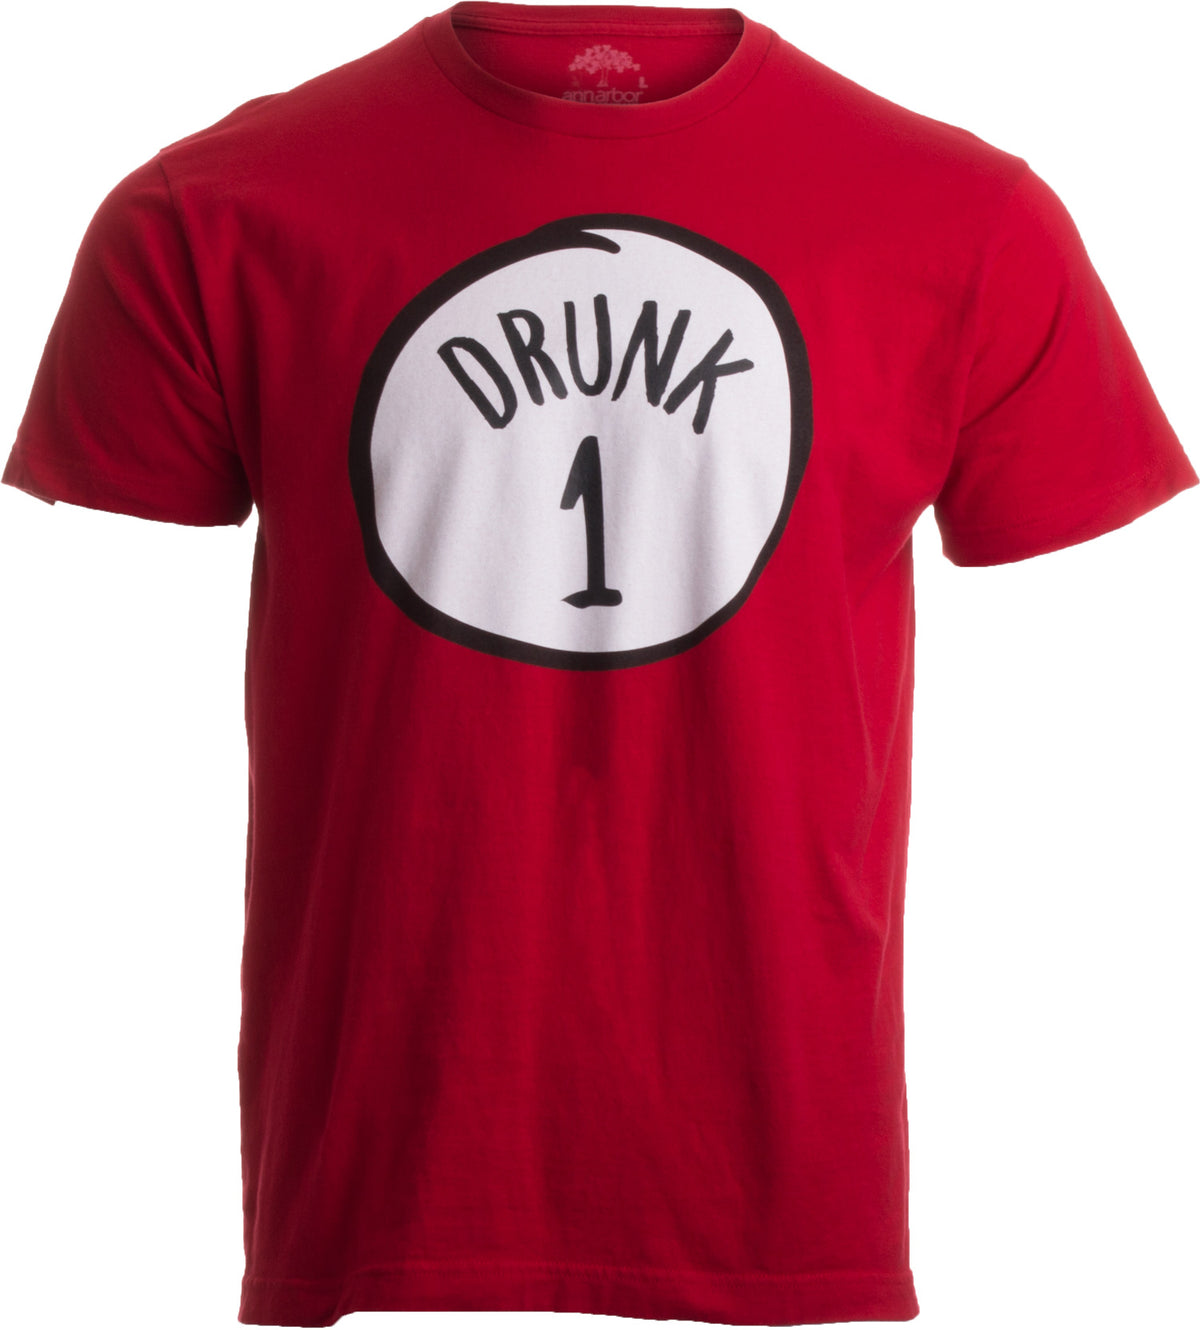 Drunk 1 | Funny Drinking Team, Group Halloween Costume Unisex T-shirt-Adult, S